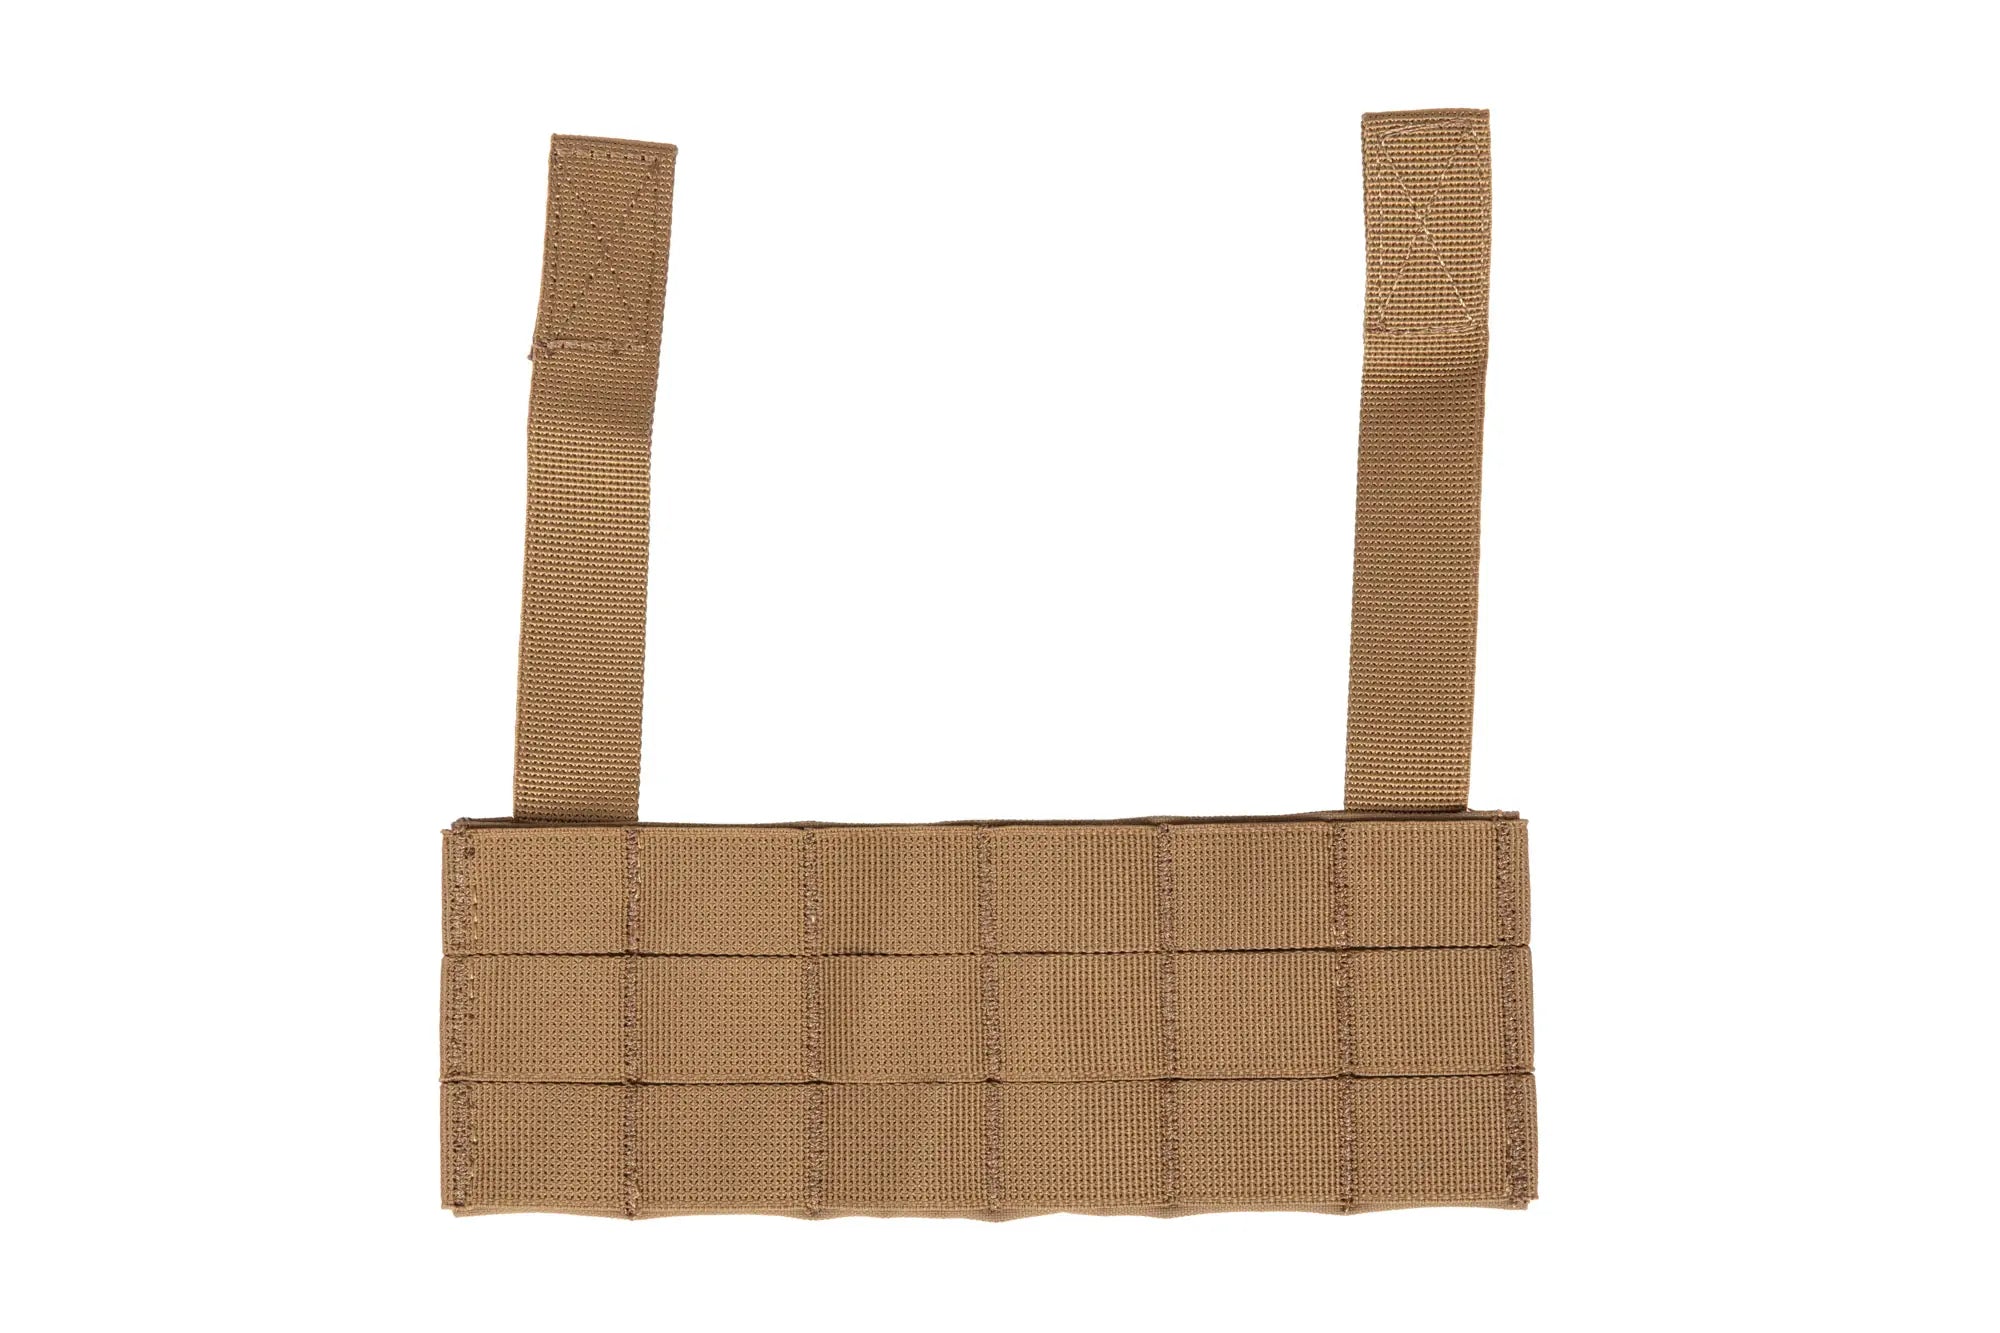 Additional Molle panel for Wosport Chest Rig waistcoats Coyote Brown